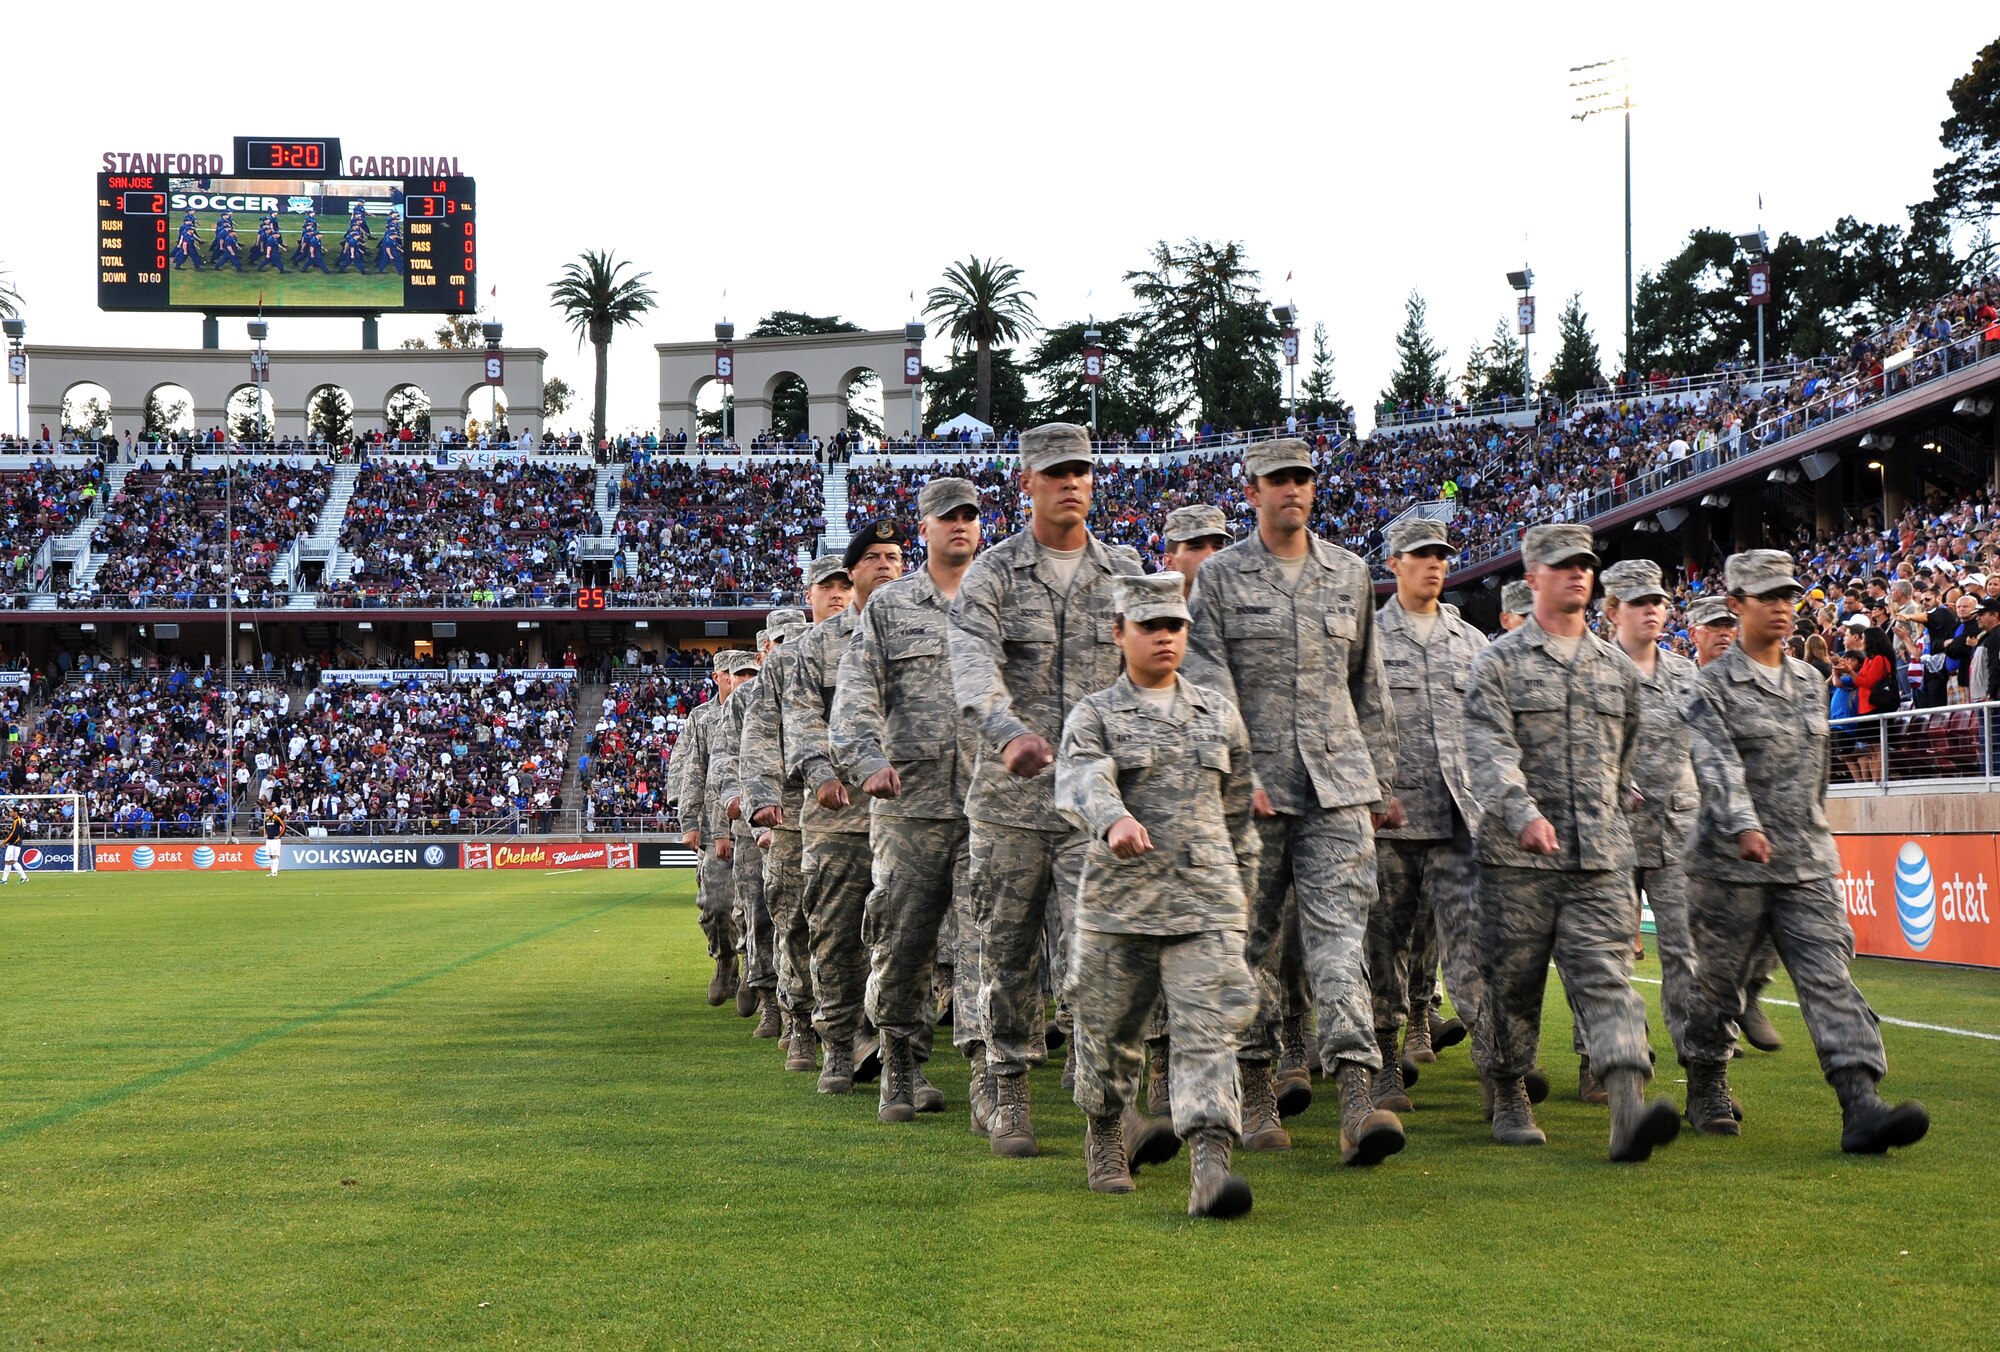 A formation of U.S. Air Force Airmen march during the halftime show of the L.A. Galaxy versus San Jose Earthquakes soccer game at Stanford Stadium, Stanford, Calif., June 30, 2012. Every branch of the U.S. military was represented with a formation. (U.S. Air Force photo by Staff Sgt. Robert M. Trujillo/Released)